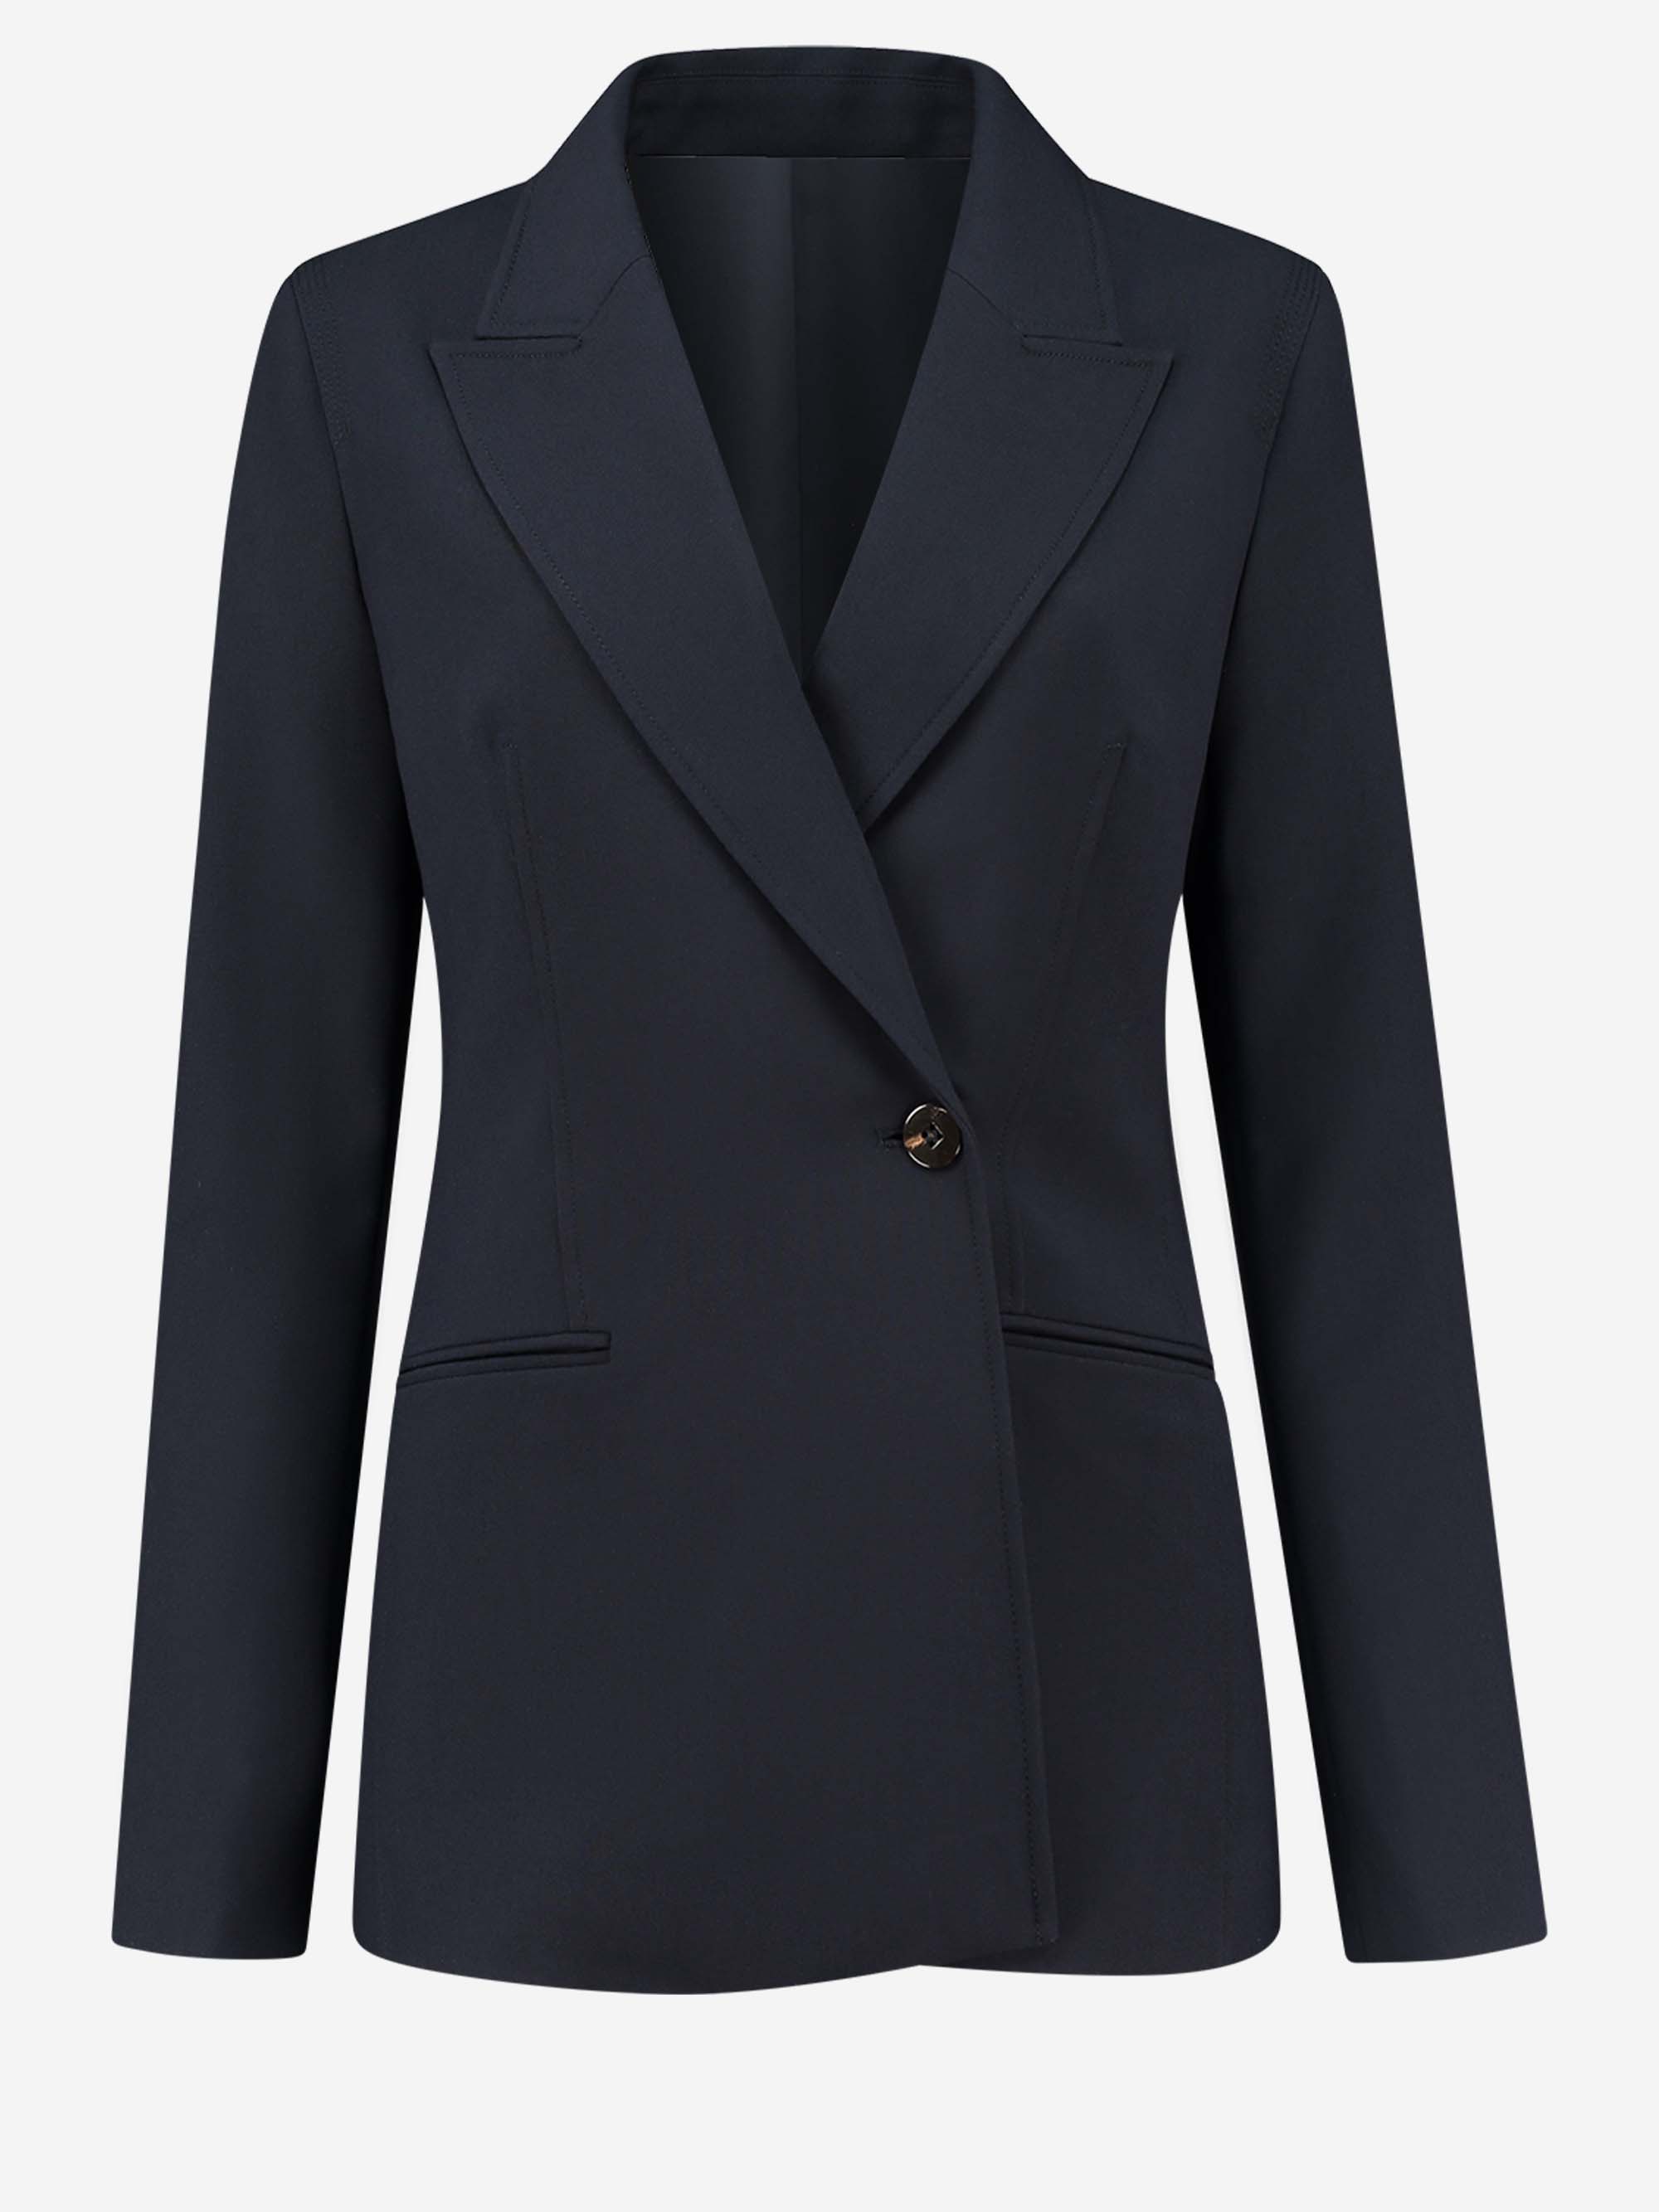 Fitted blazer with lapel collar